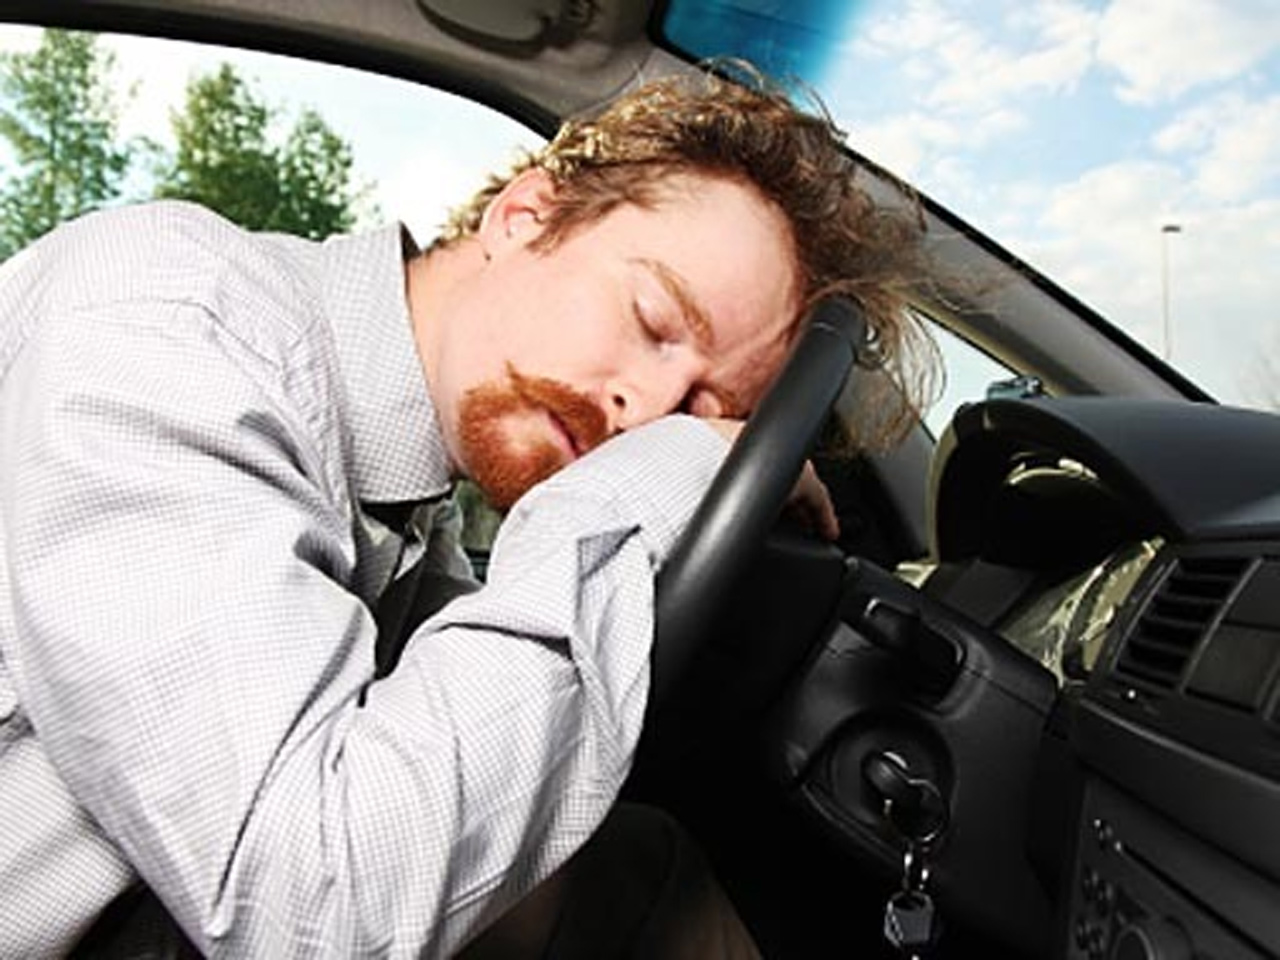 42 Percent Of Drivers Admit To Sleeping Behind The Wheel In Past Month